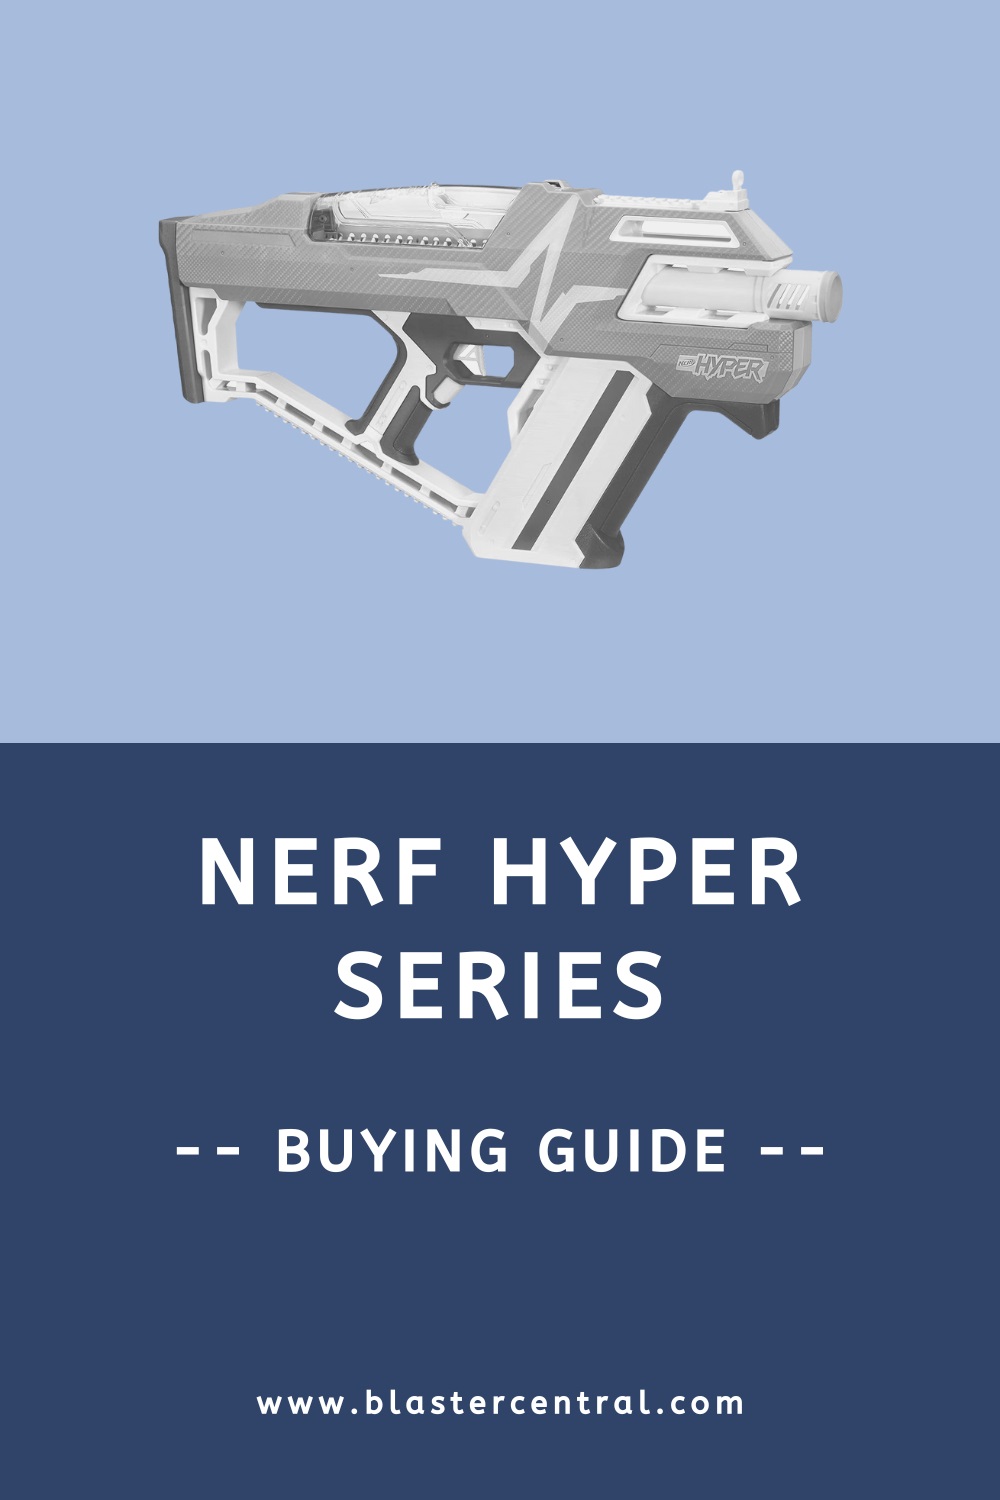 Nerf Hyper series review